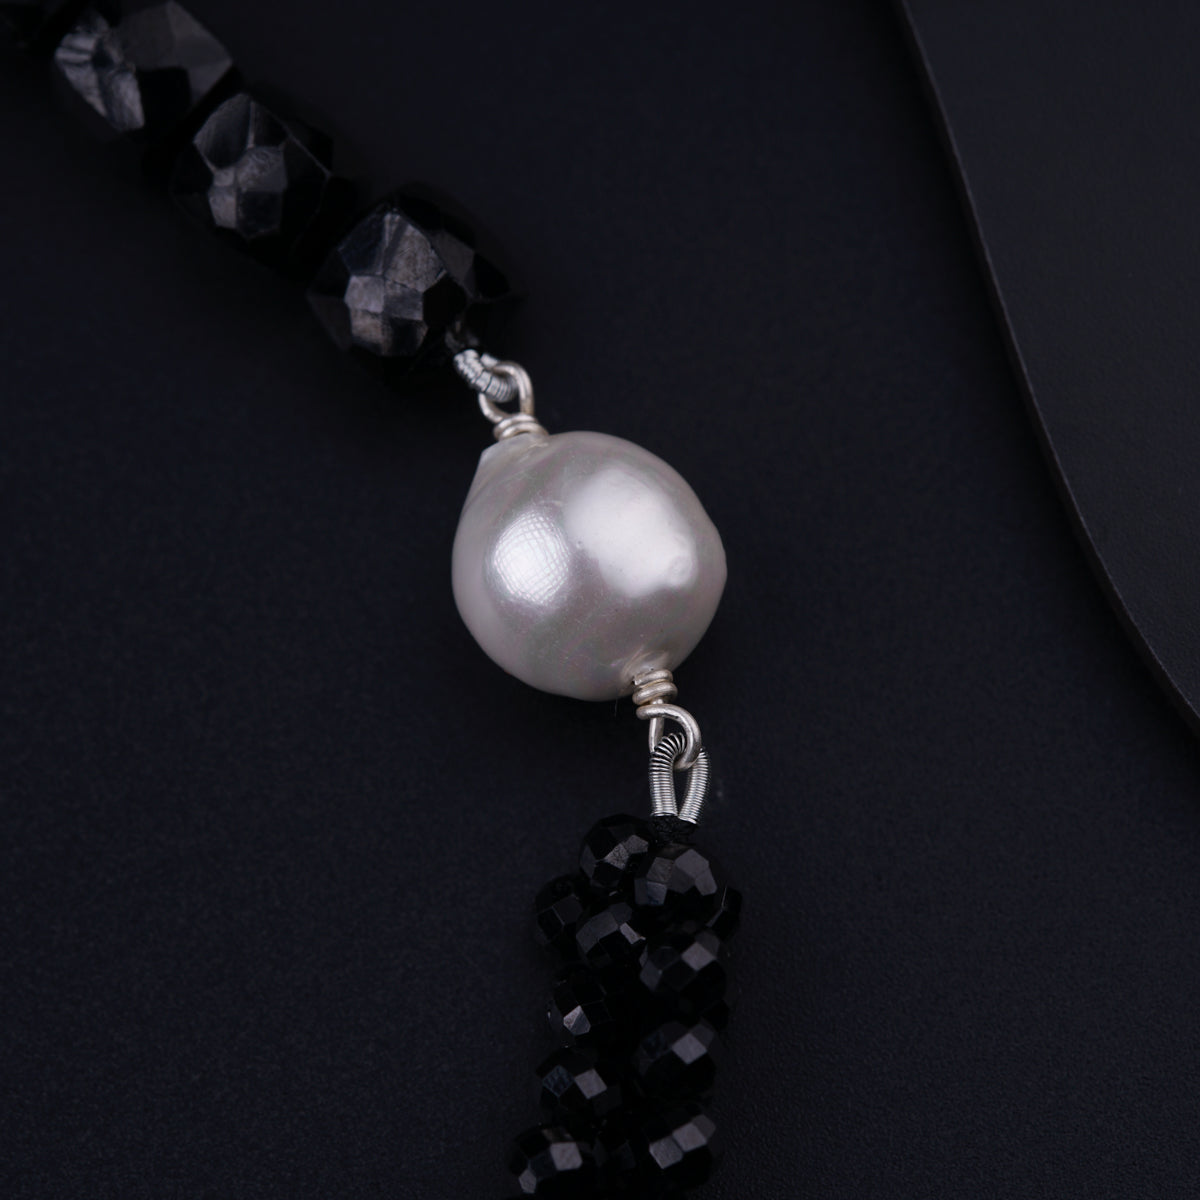 Yin Yang: Silver Necklace with Black Spinel and Pearl